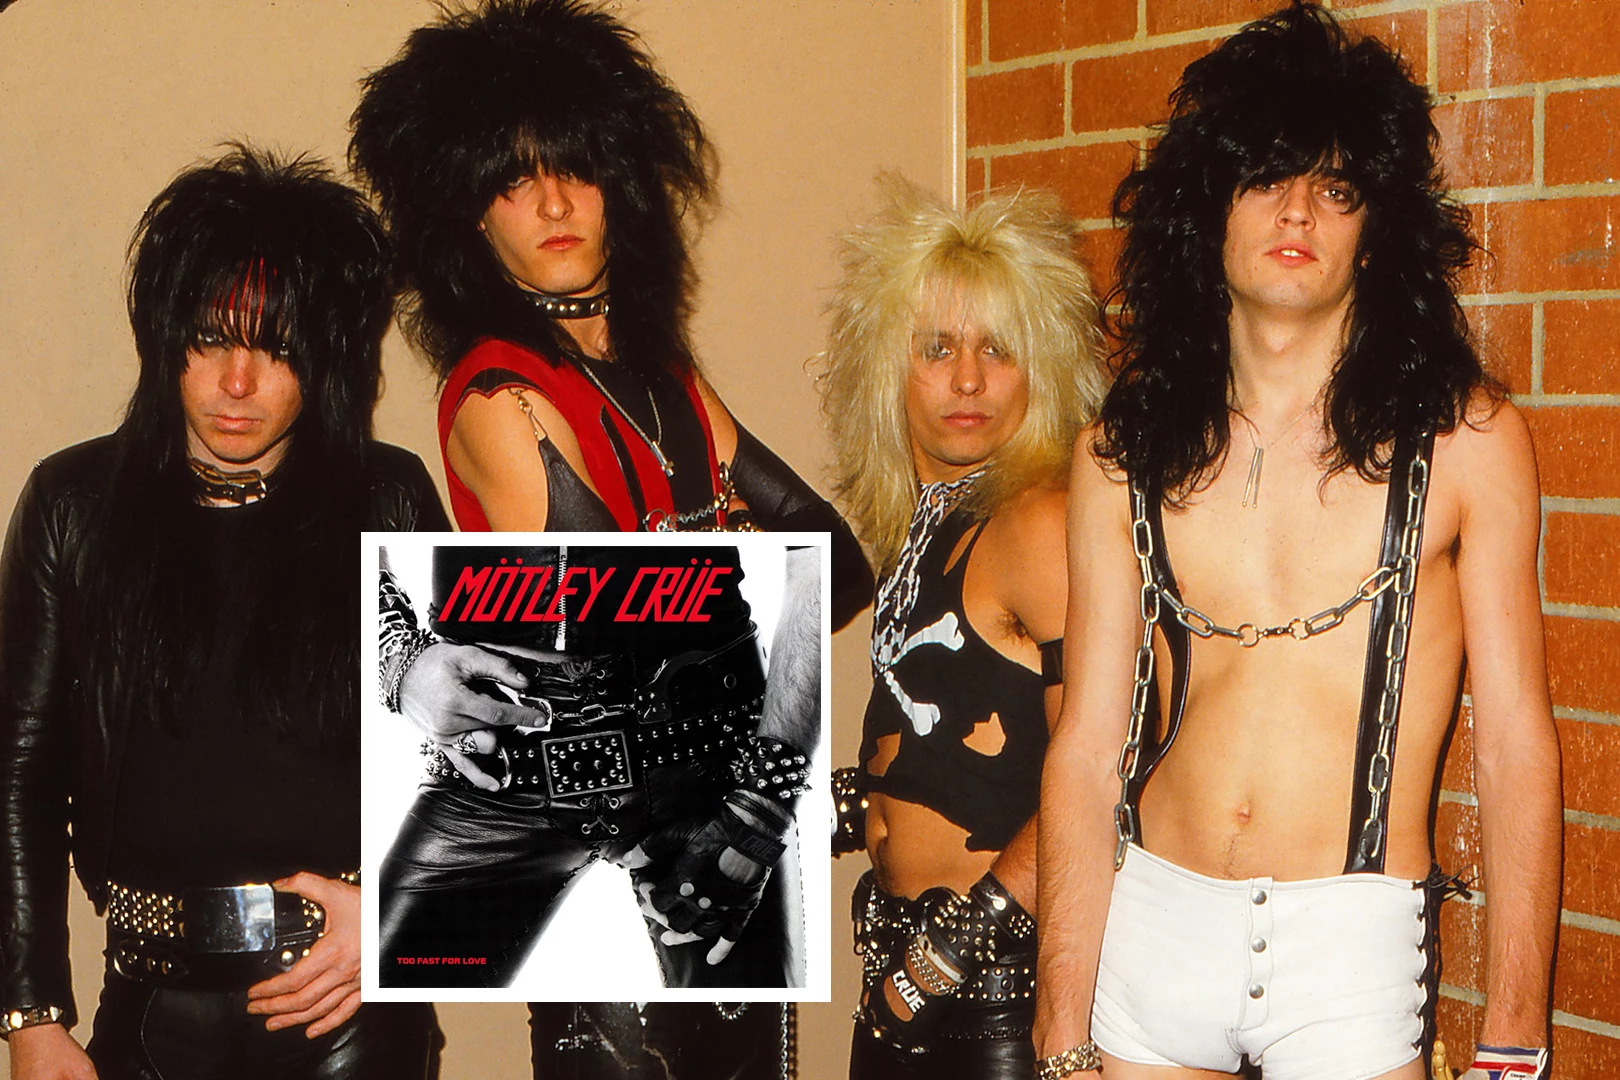 What Critics Said About Motley Crue's Debut 'Too Fast for Love'